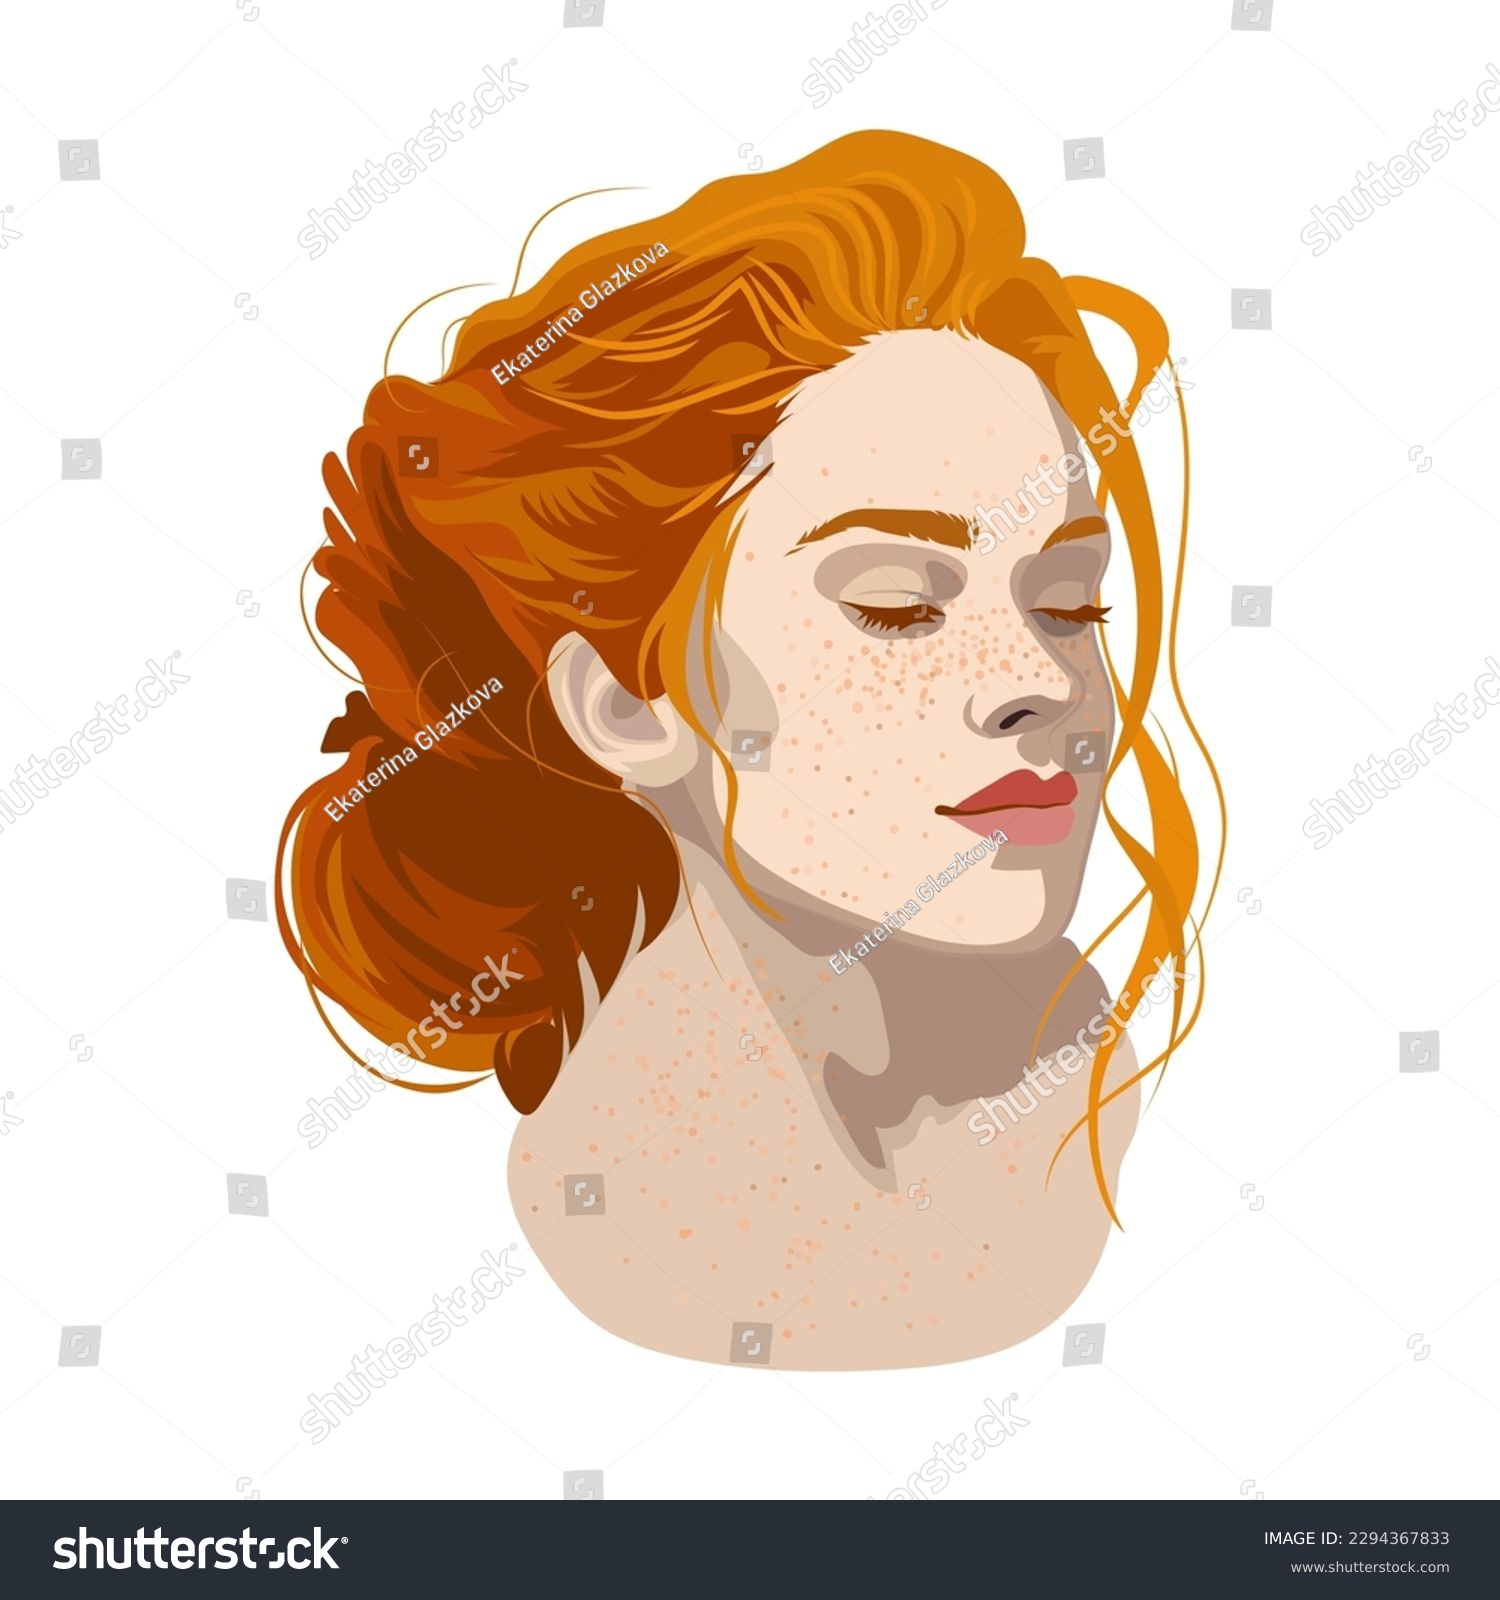 Portrait of a beautiful girl with closed eyes, freckles and red hair with a beam. Vector illustration isolated on white background #2294367833